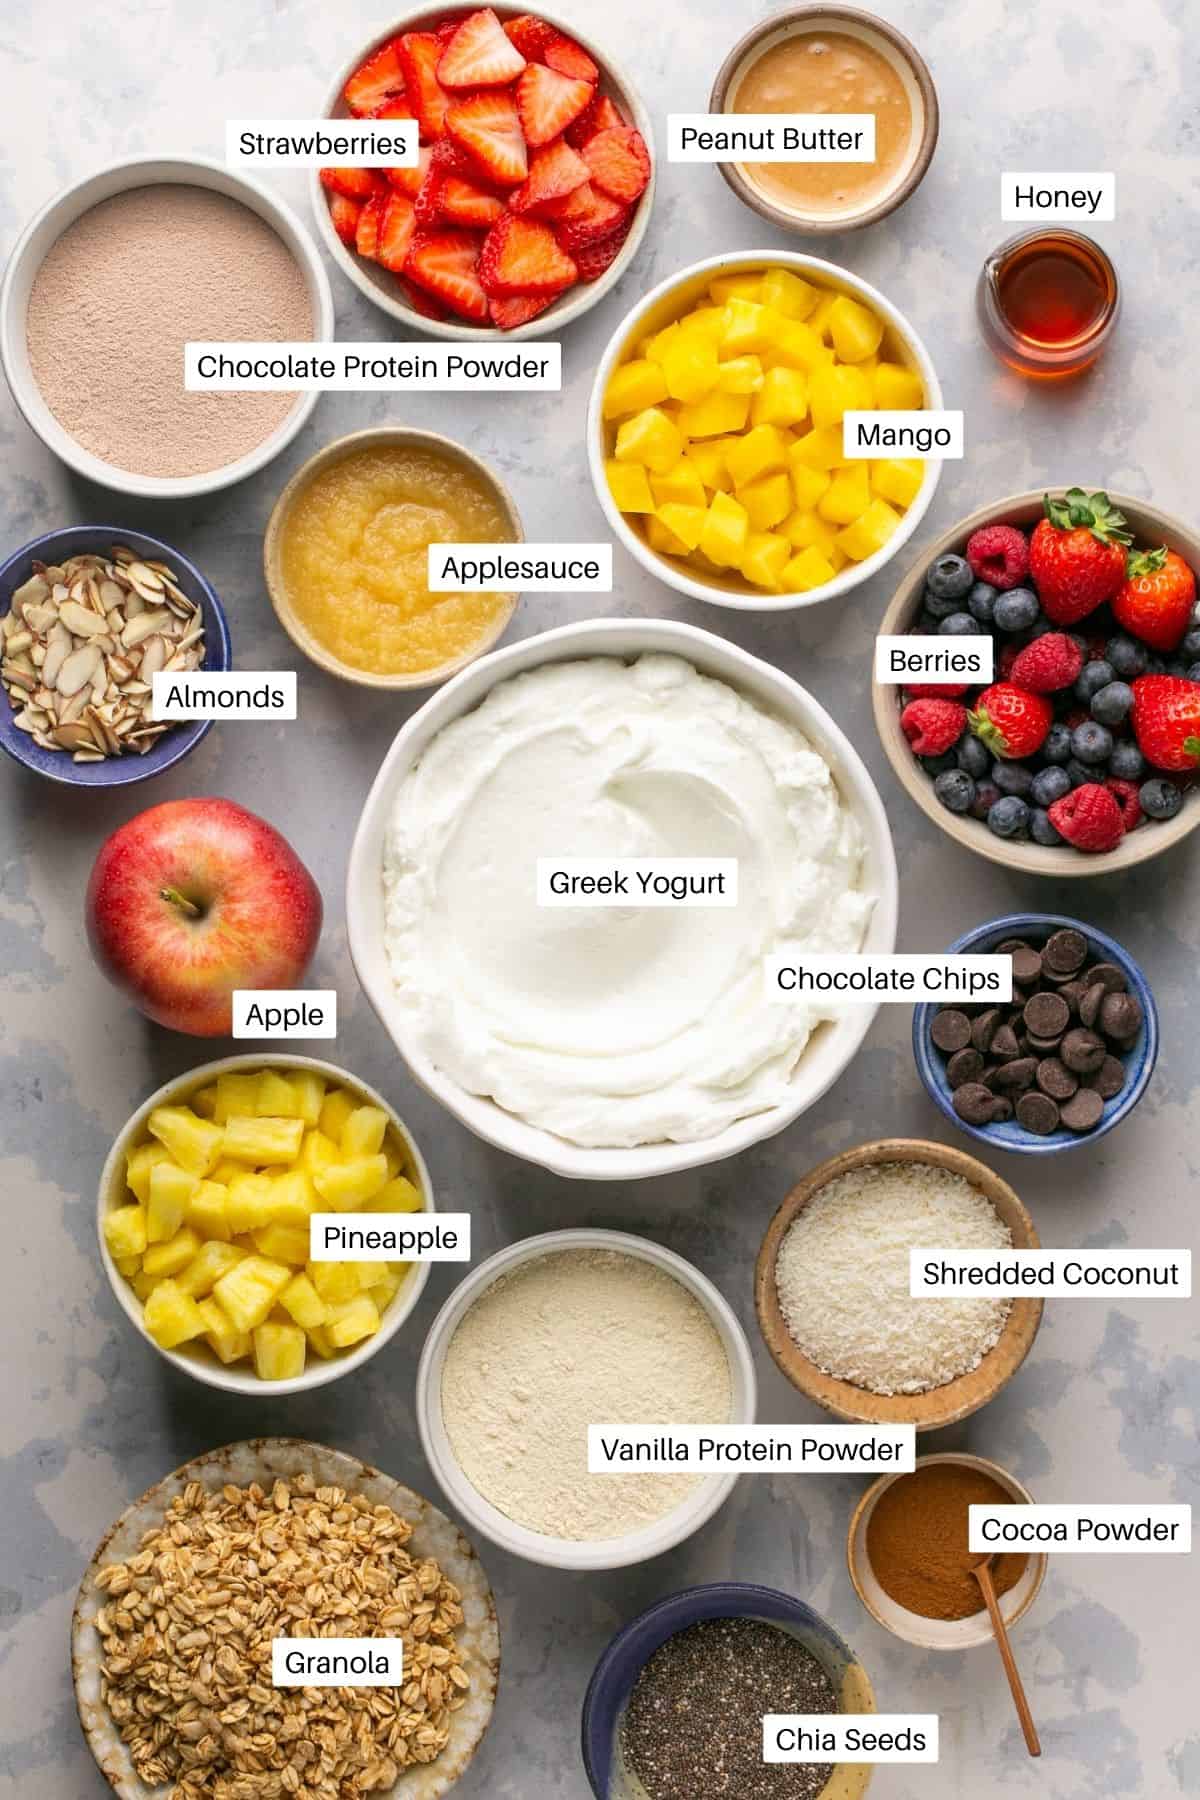 Greek yogurt, berries, peanut butter, protein powders and toppings for all four yogurt bowl types. 